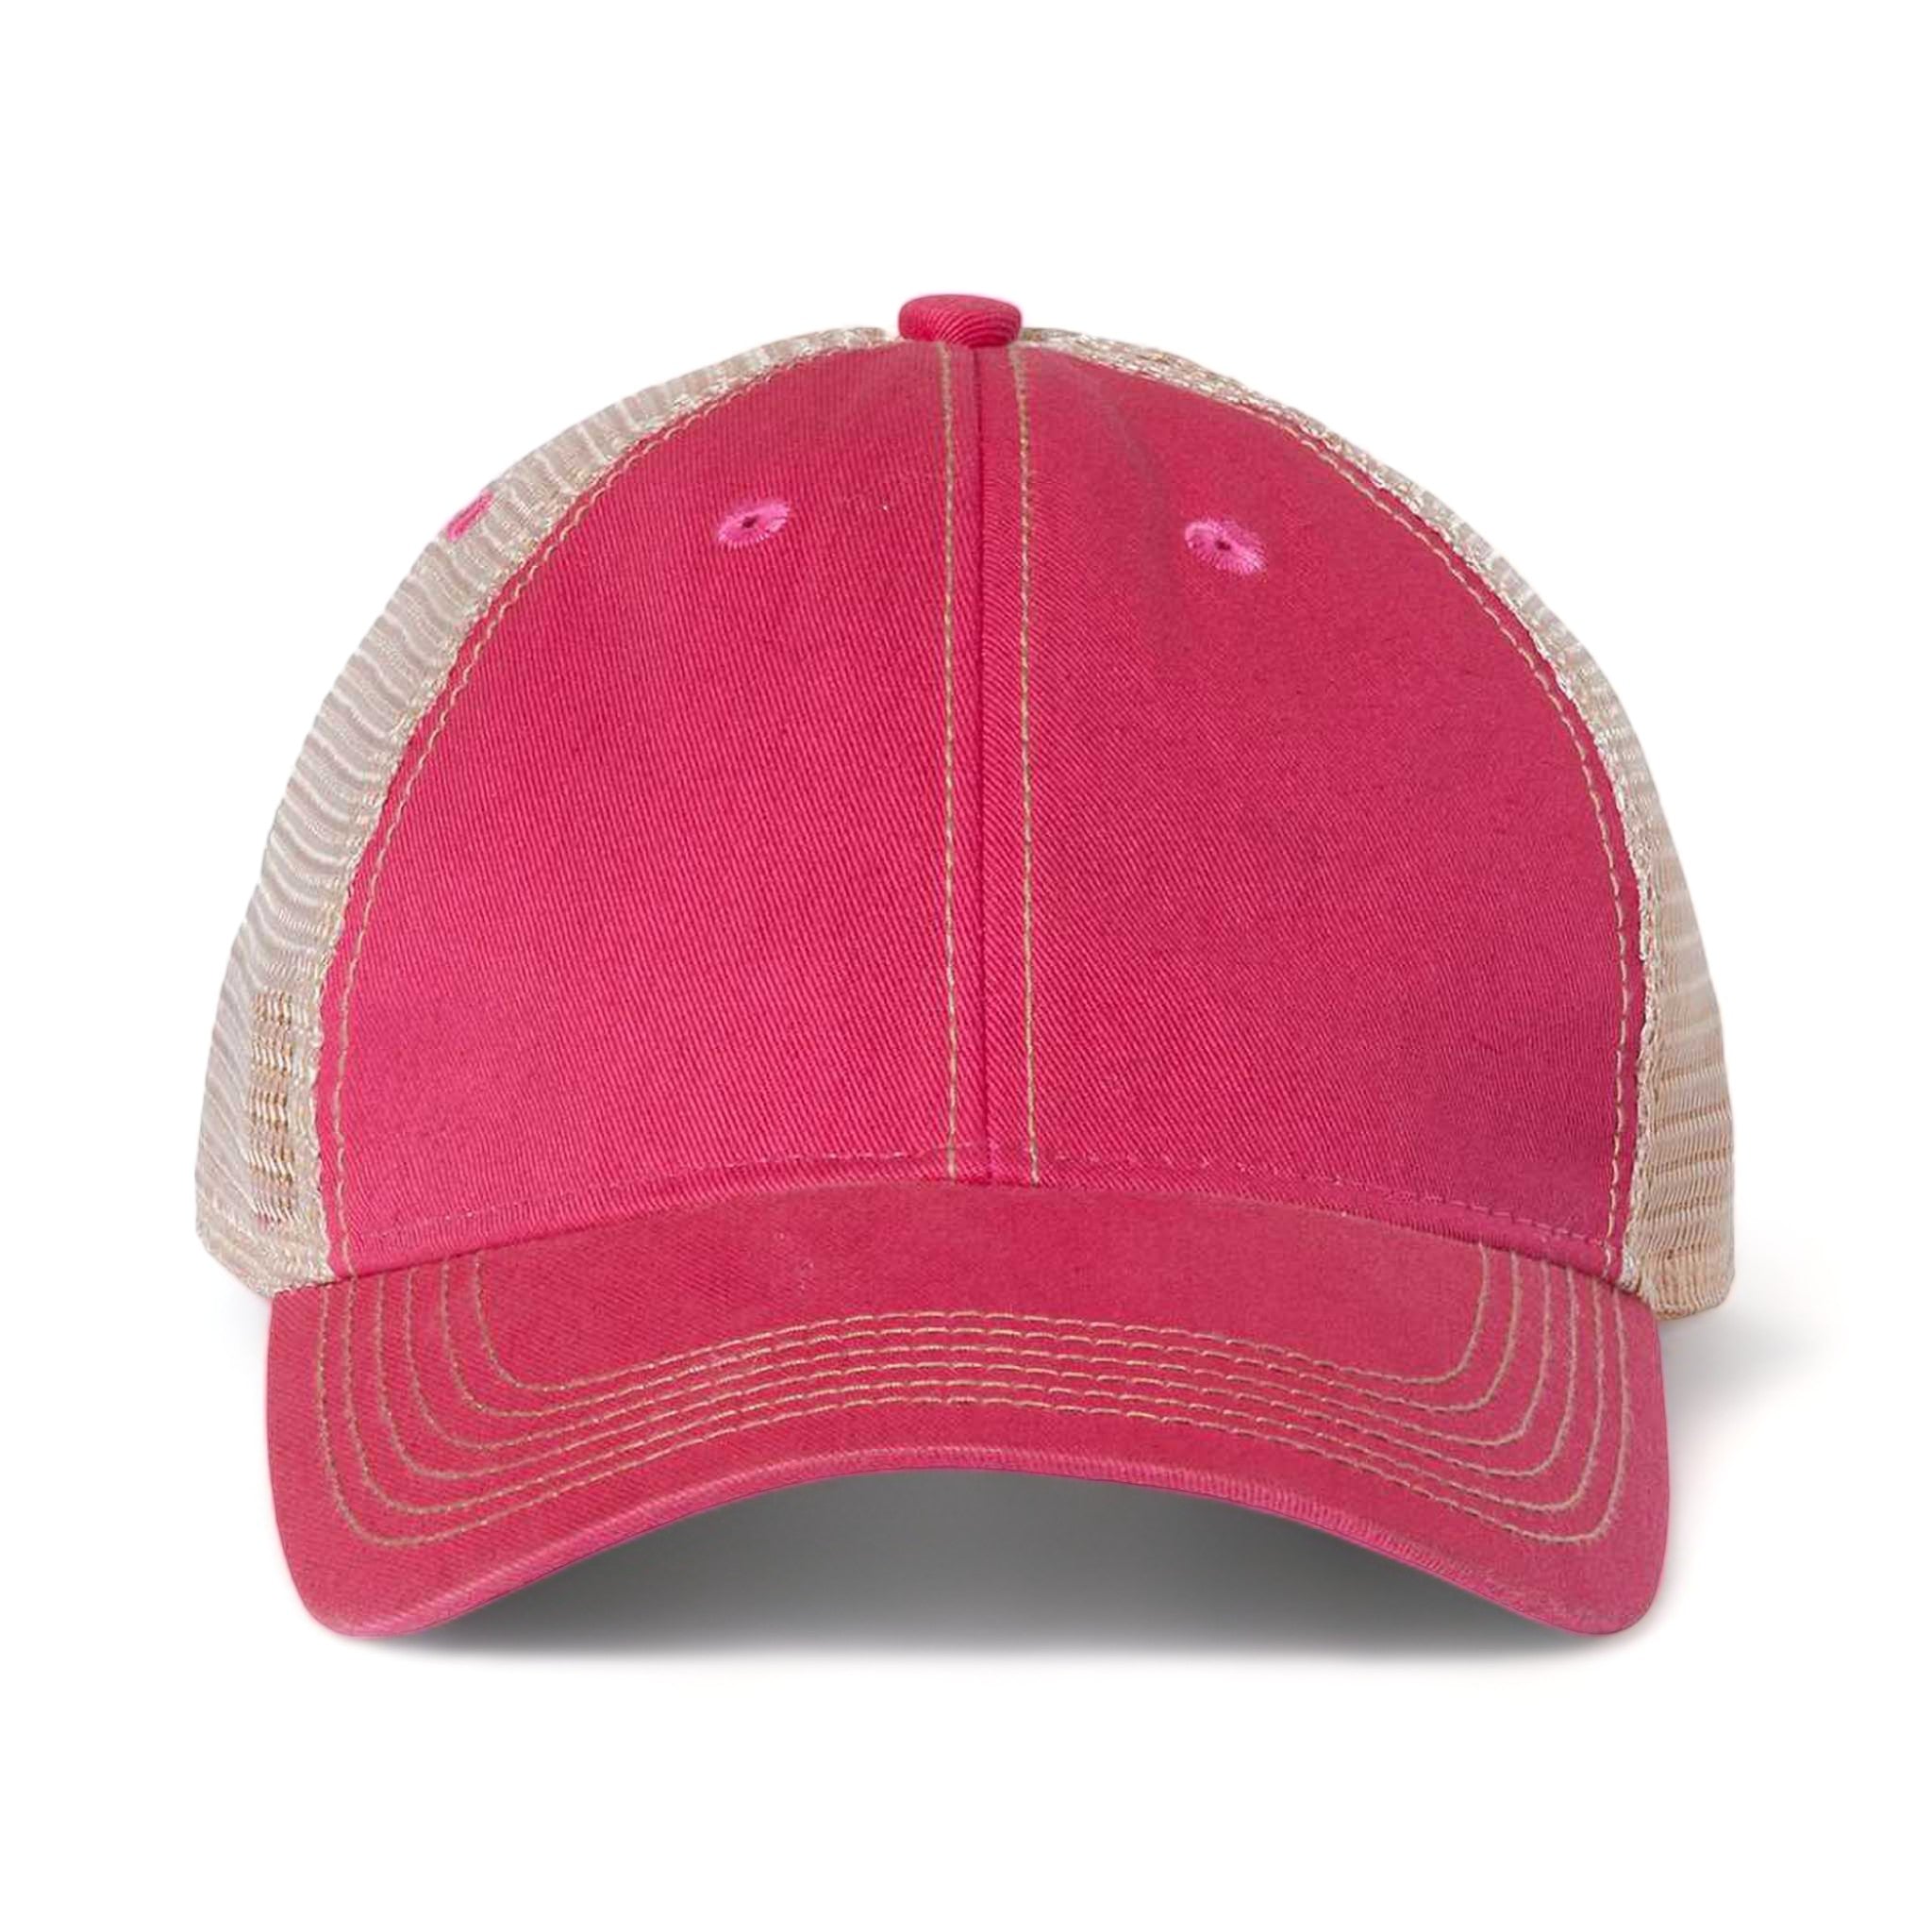 Front view of LEGACY OFA custom hat in dark pink and khaki